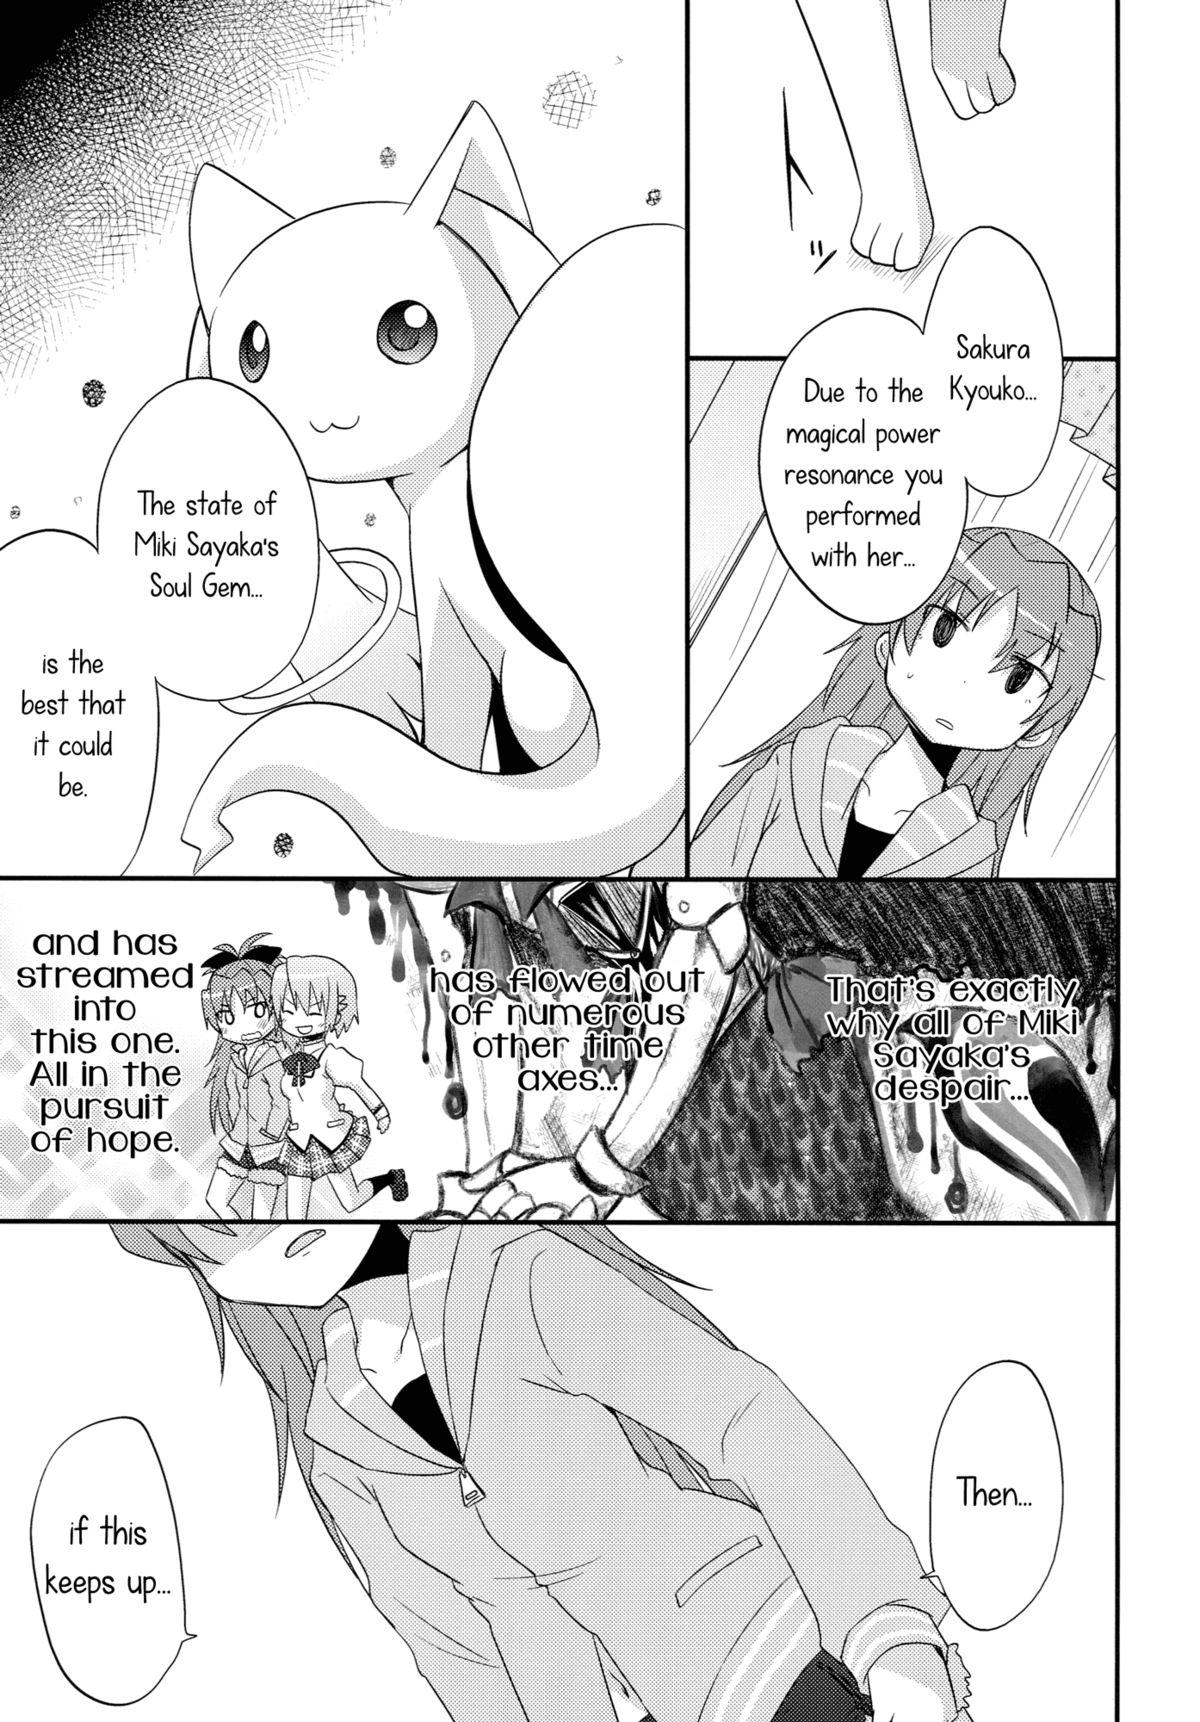 Deep Our Courting War Front - Puella magi madoka magica Gaping - Page 10